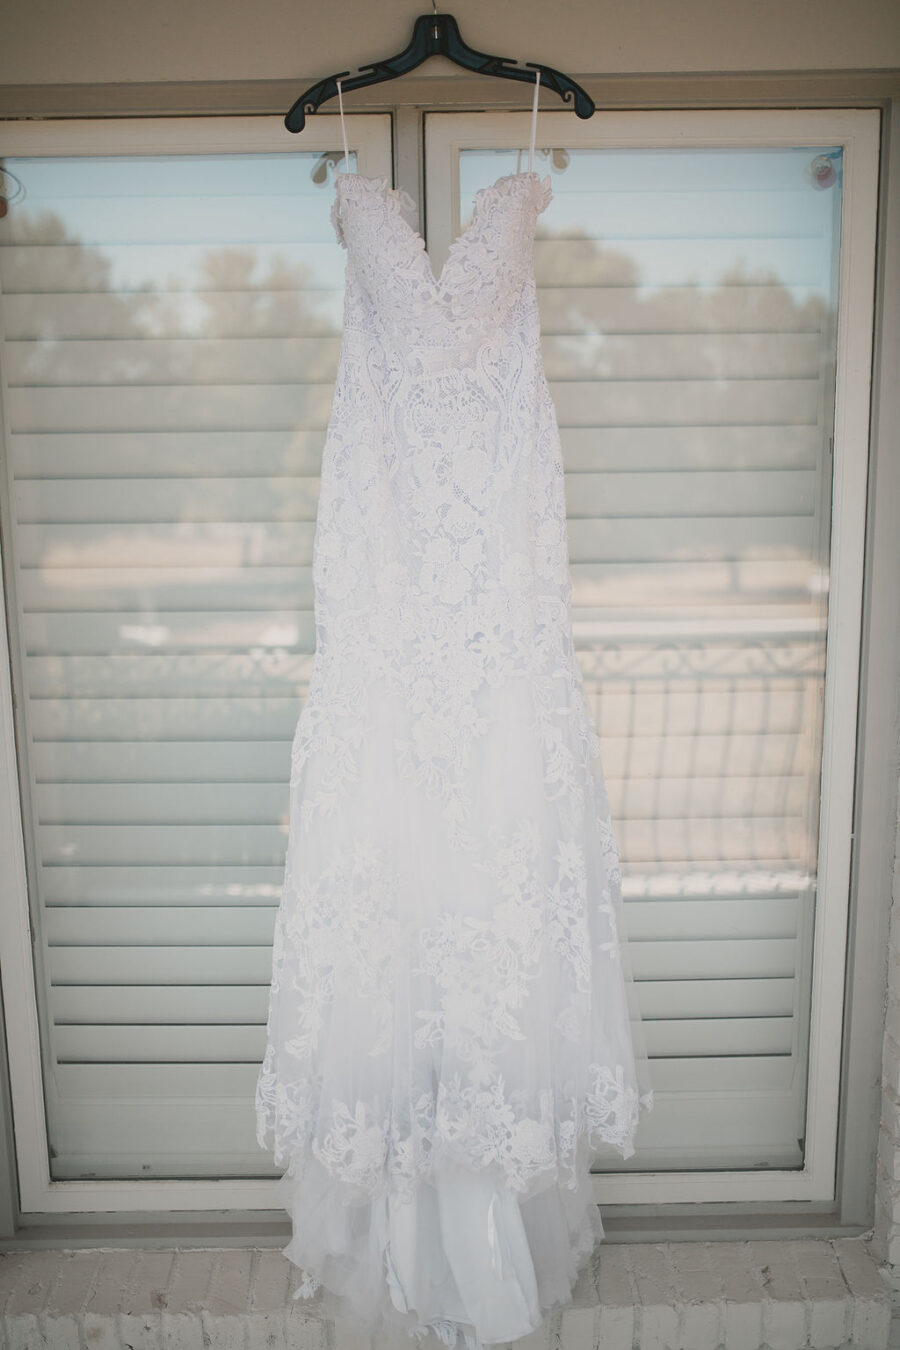 Lace wedding dress portrait: Romantic Outdoor Wedding at Reunion Stay